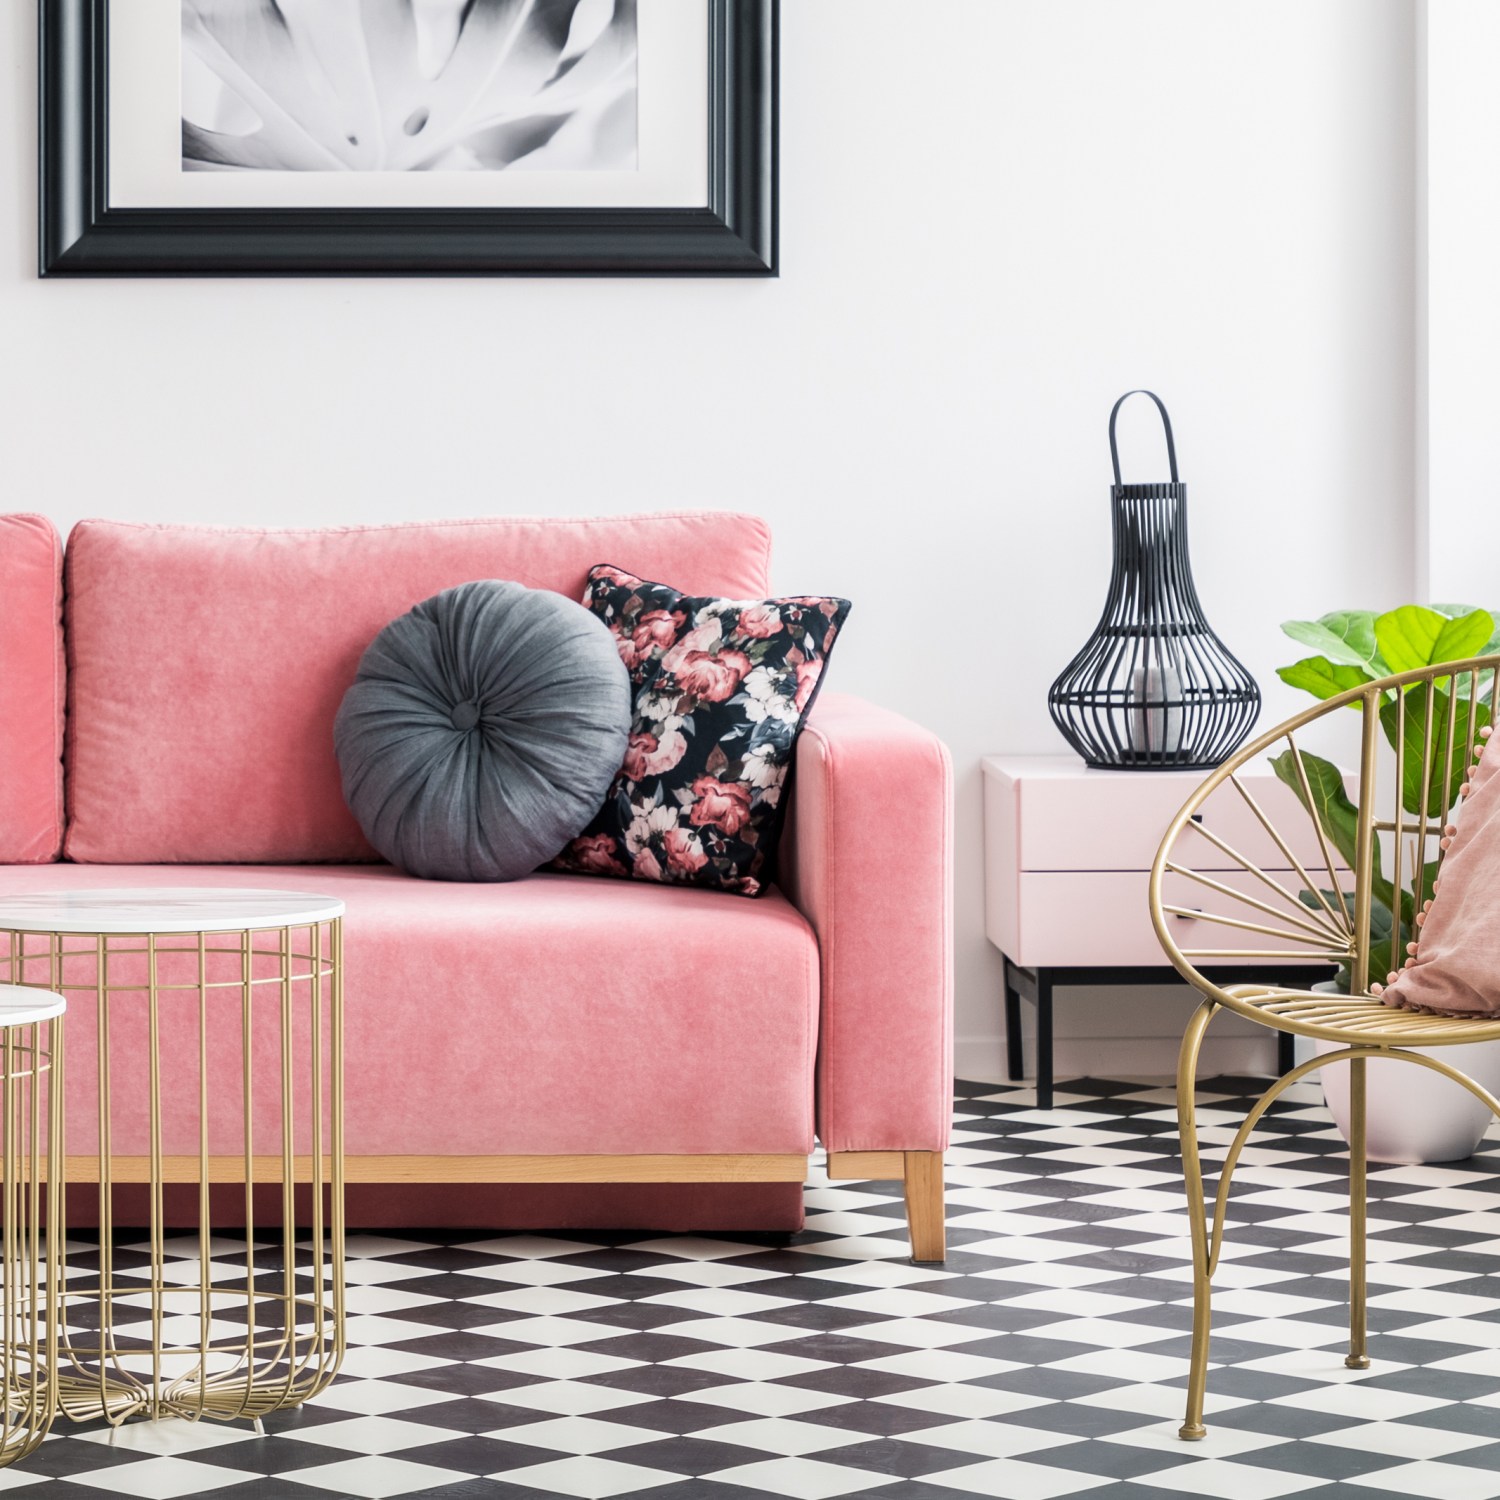 photo of a living room interior with a pink velvet sofa golden armchair and tables with decorative lights and plants with a wall painting and checkered tile floor